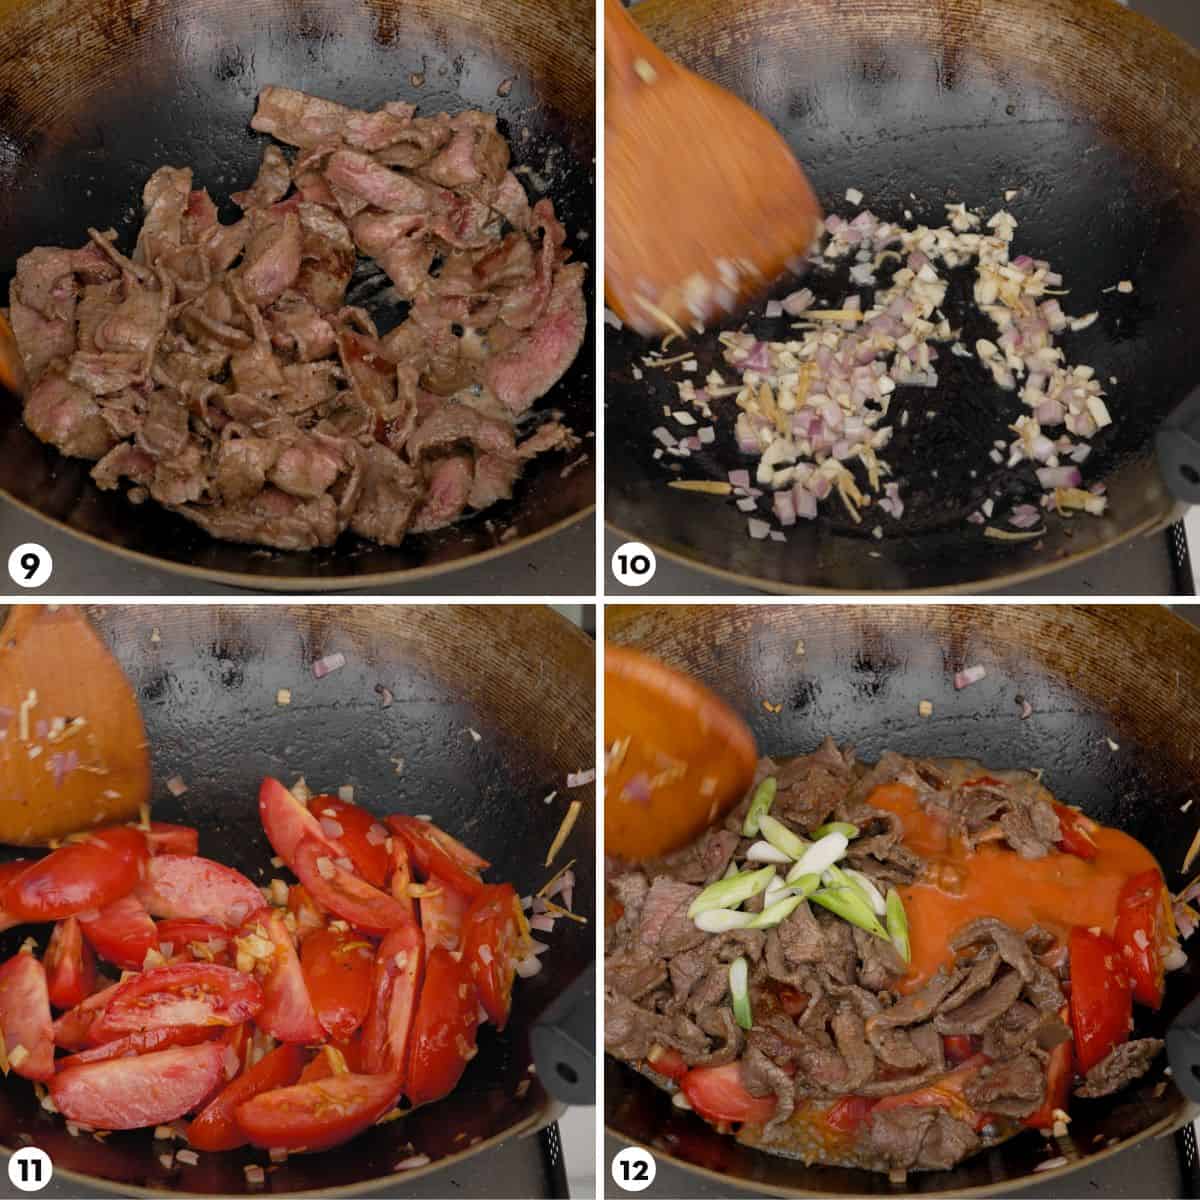 process shots for tomato beef stir fry steps 9-12